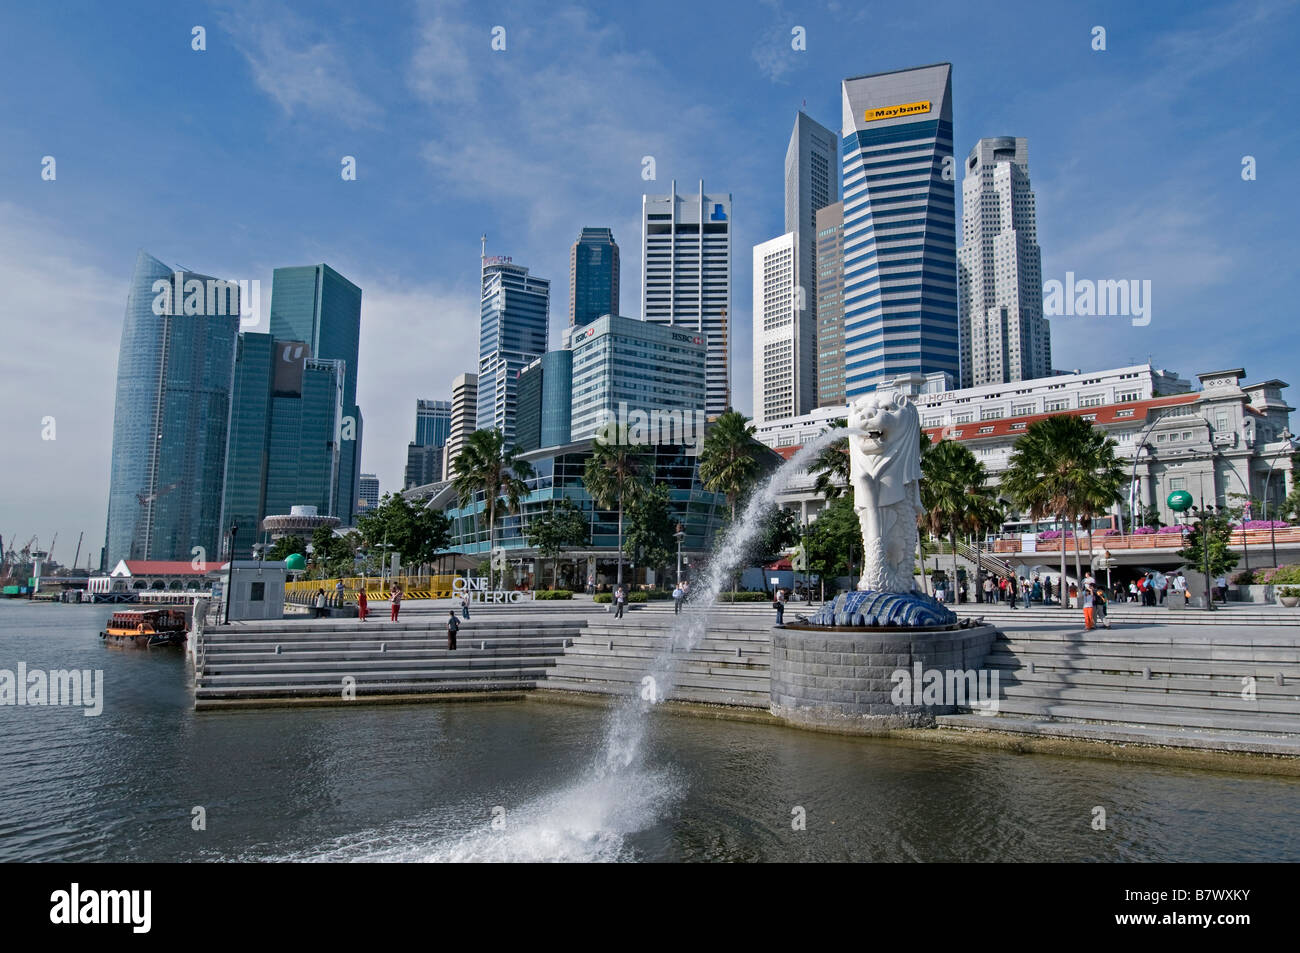 Merlionpark Marina bay half sea lion statue water fountain background Raffles Place CBD financial bank commercial centre Stock Photo